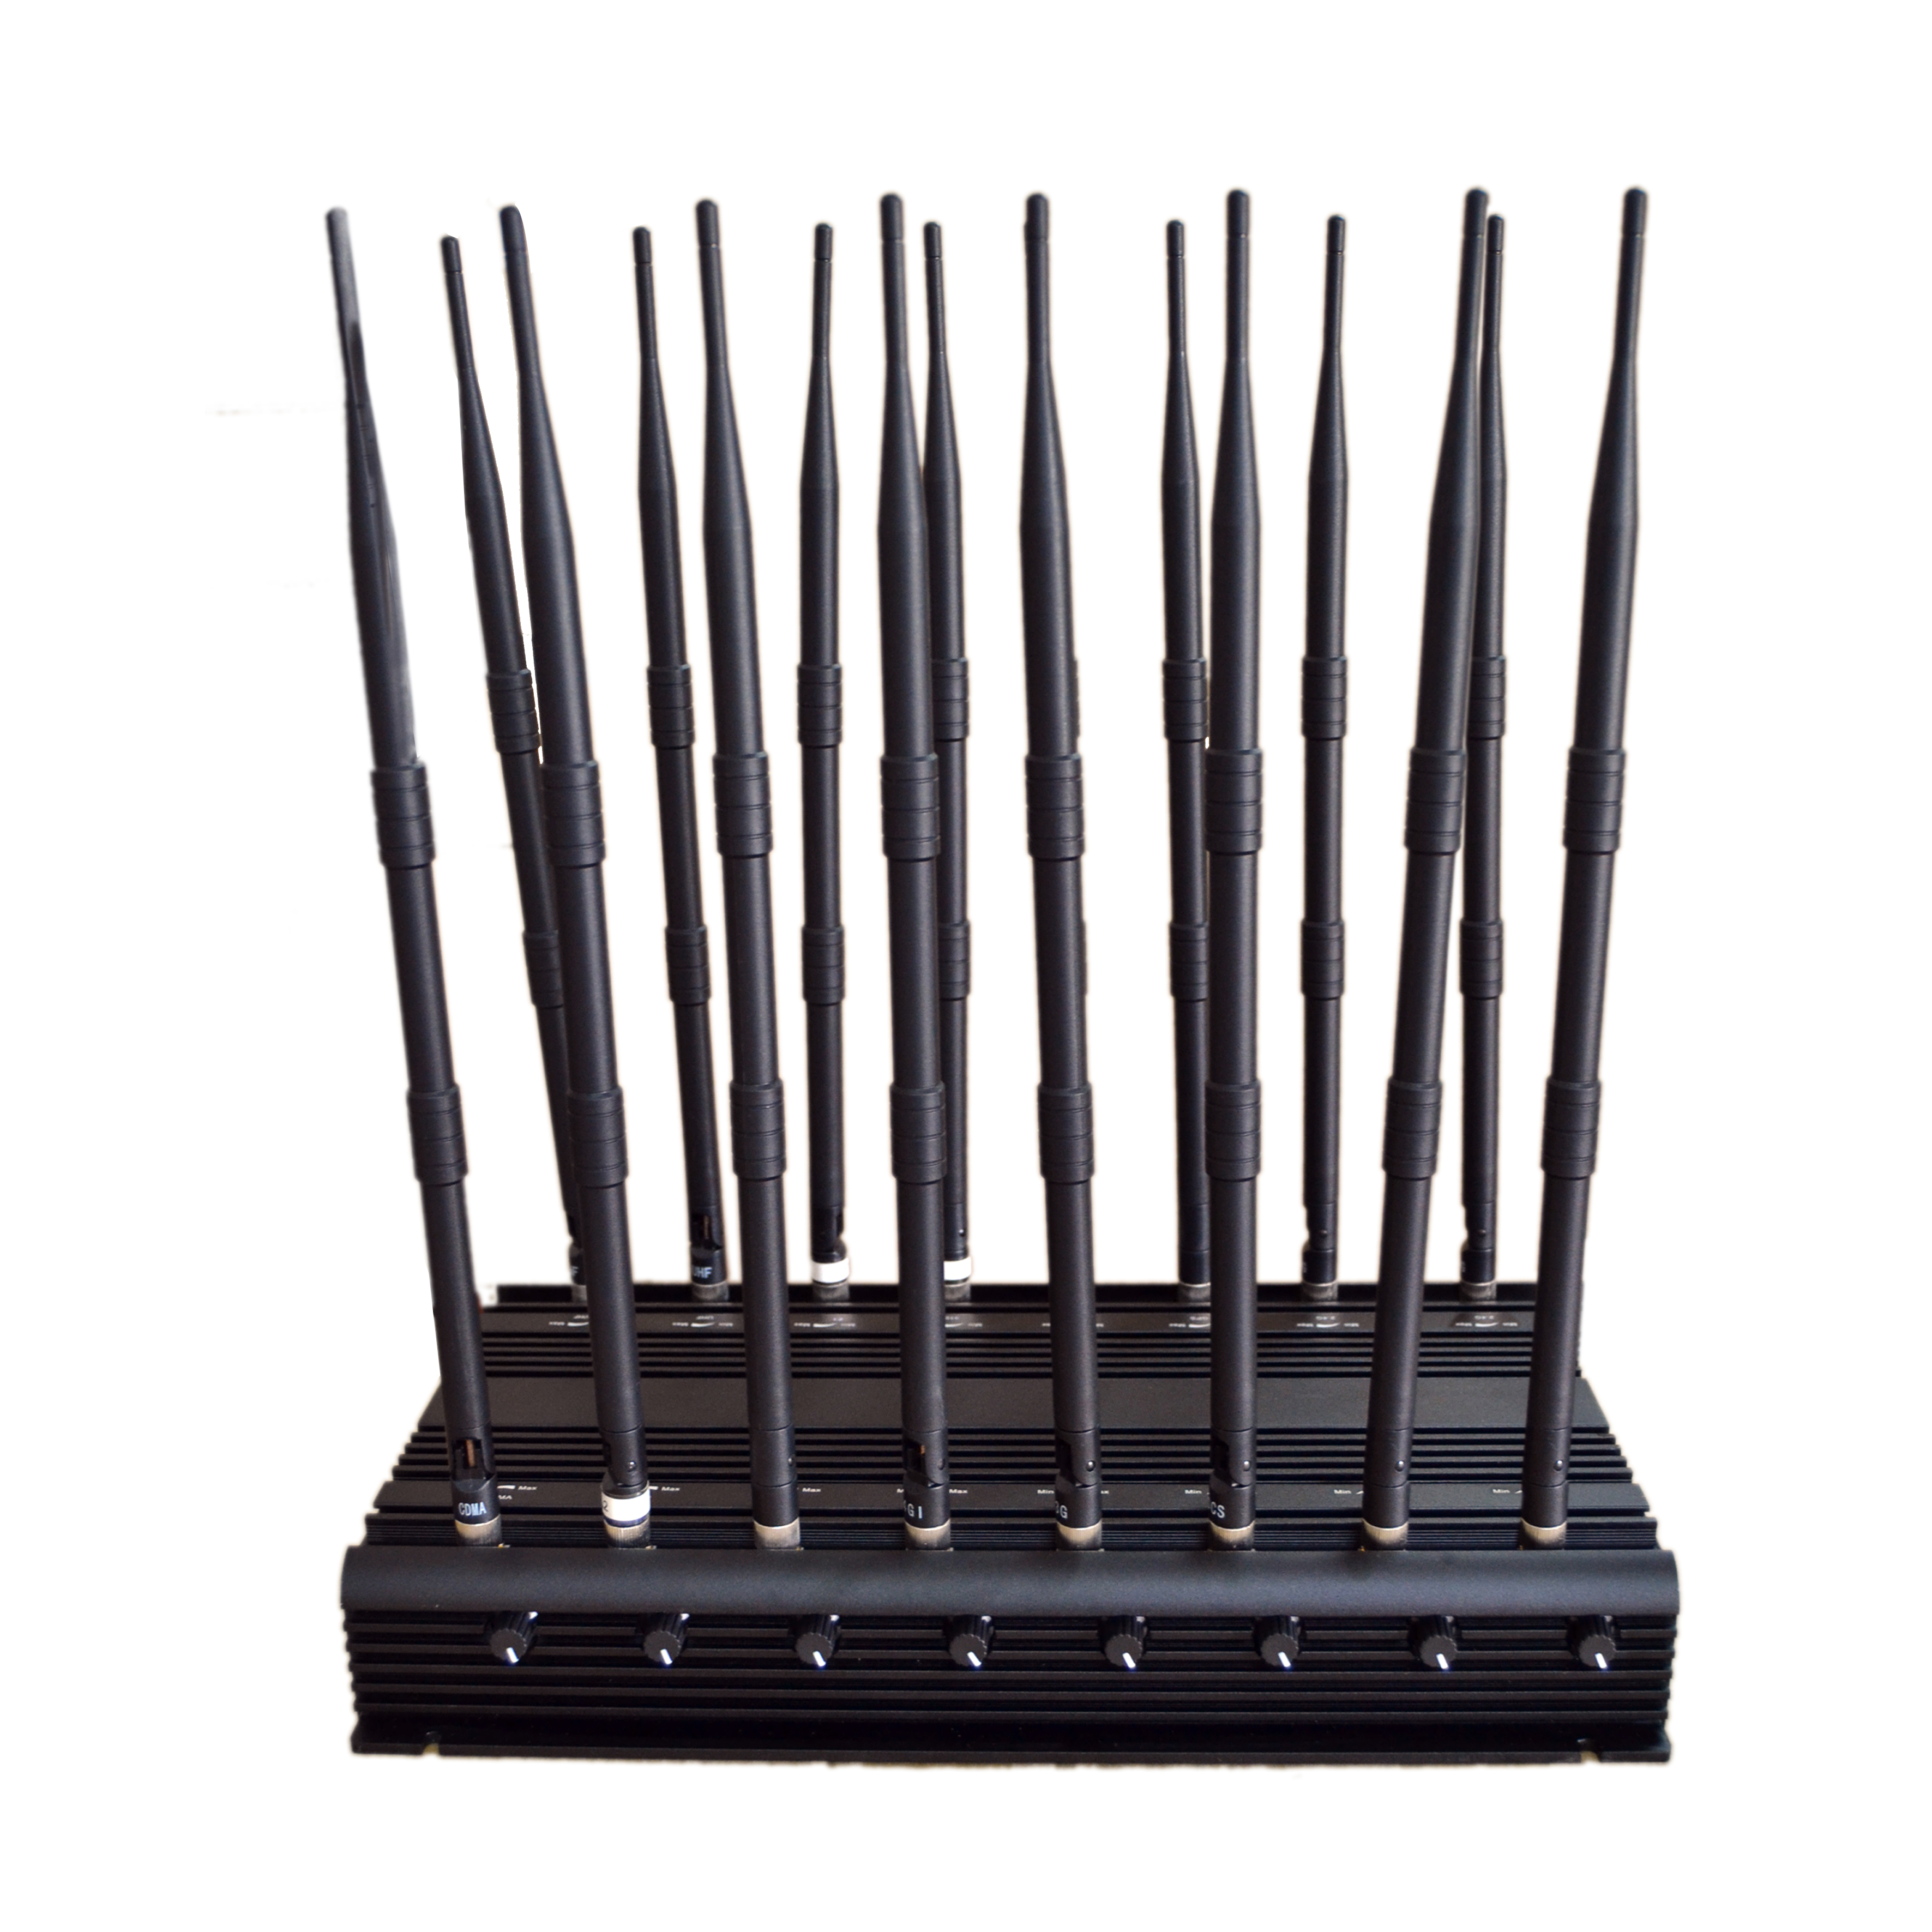 jammer nut goodie candy - 38w High Power Desktop Multi-Band WiFi GPS Mobile Signal Jammer